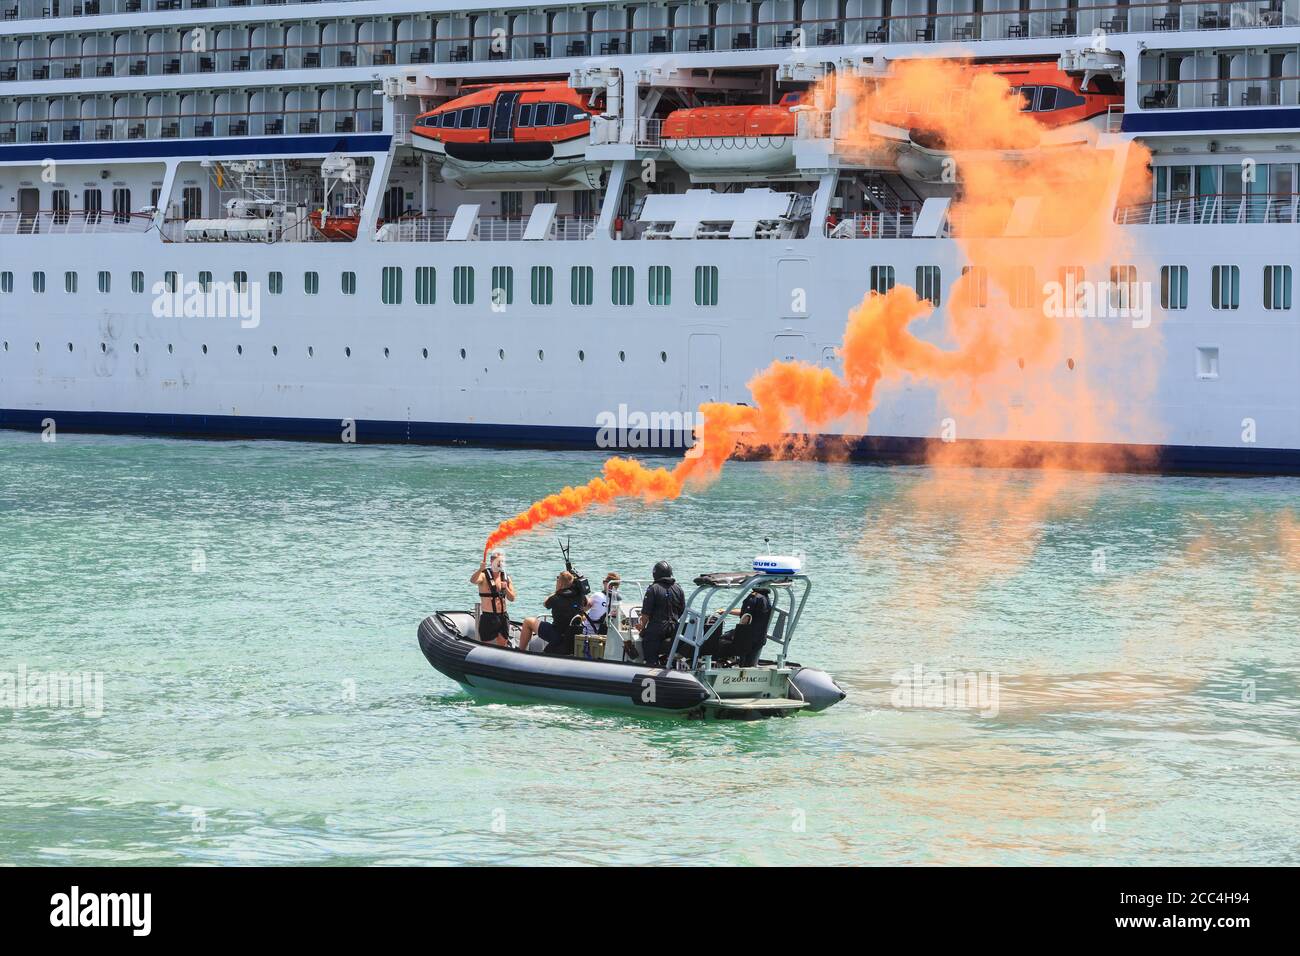 A man in an inflatable boat sets off a smoke flare in a simulated emergency. In the background is a cruise liner. Auckland, New Zealand, 1/25/2019 Stock Photo